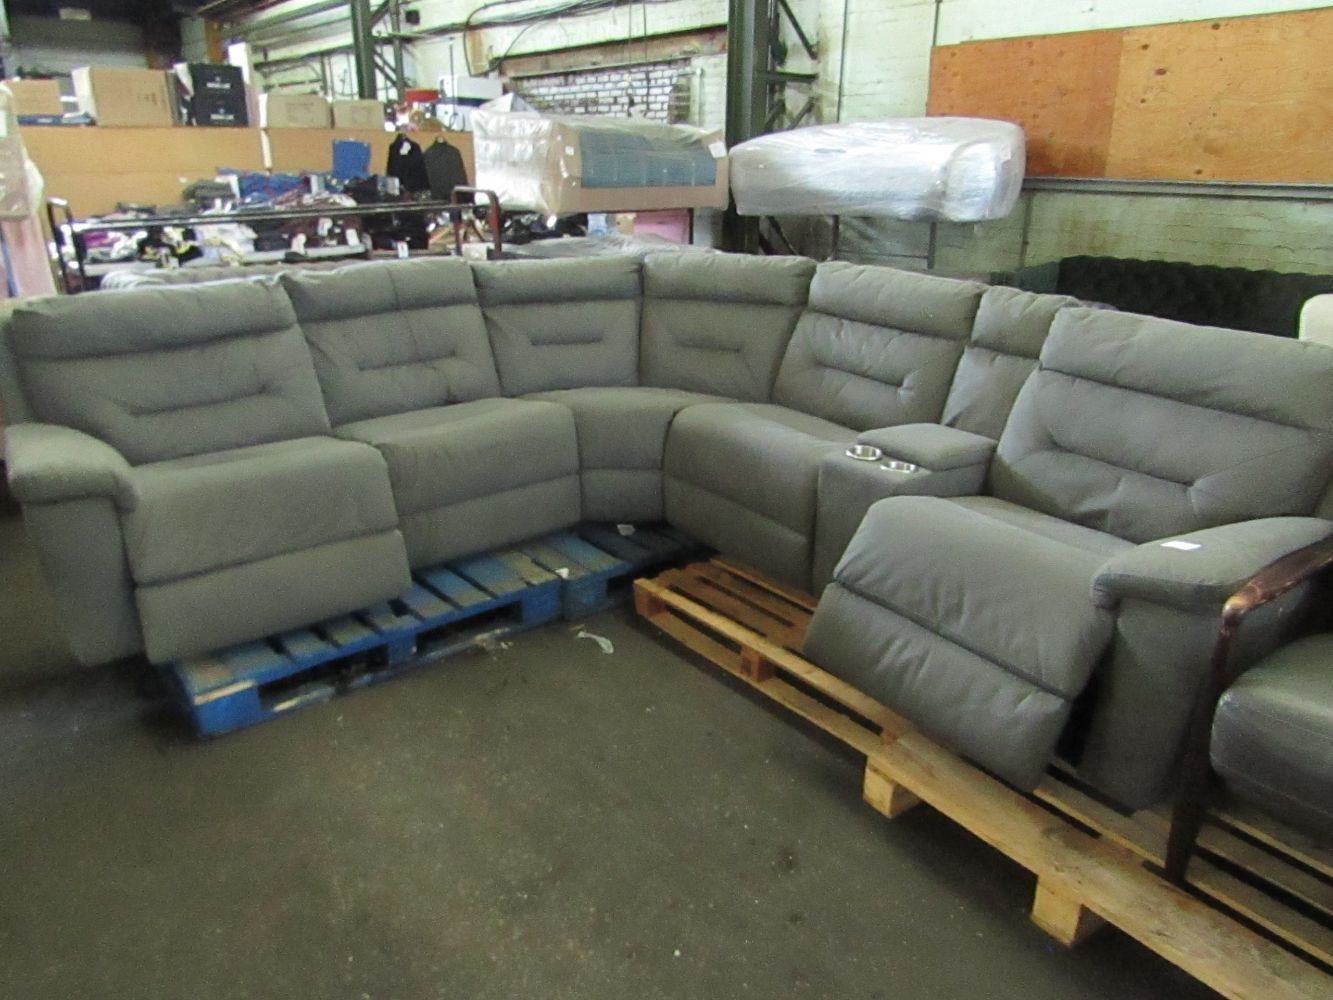 Sofas from Costco, Swoon, Made and more